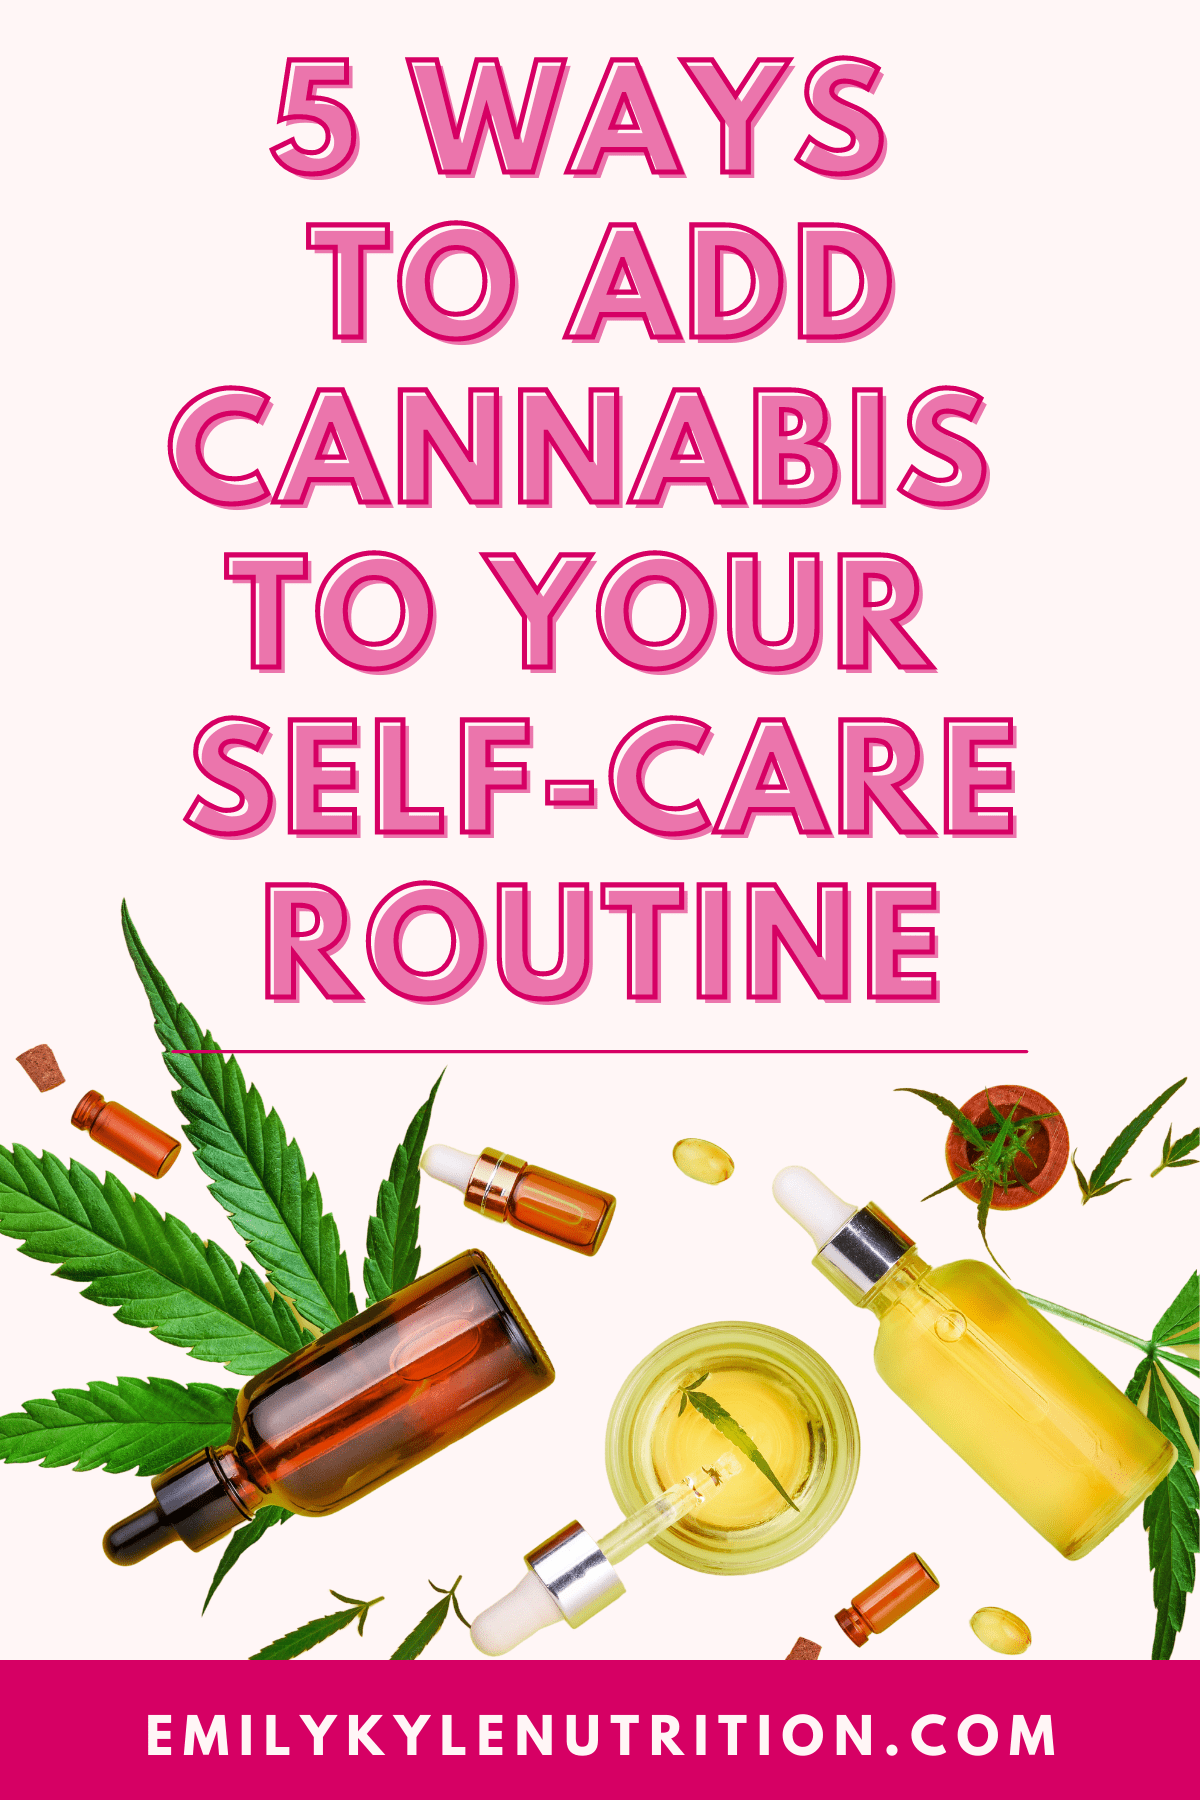 Text stating: 5 5 Ways To Add Cannabis To Your Self-Care Routine.